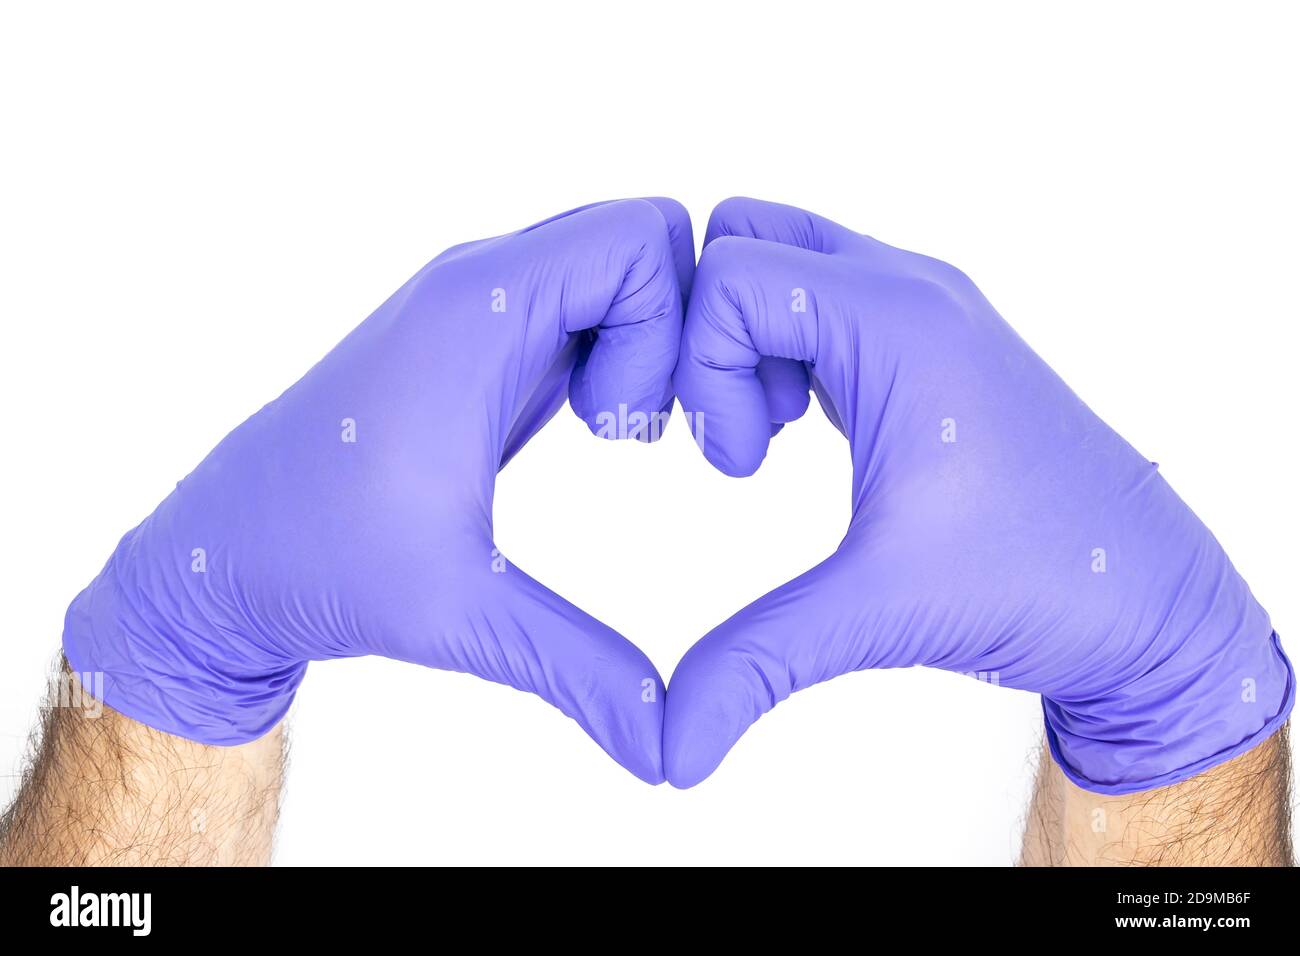 Hands of a doctor or nurse with medical gloves depict a heart isolated on a white background, medicine concept Stock Photo